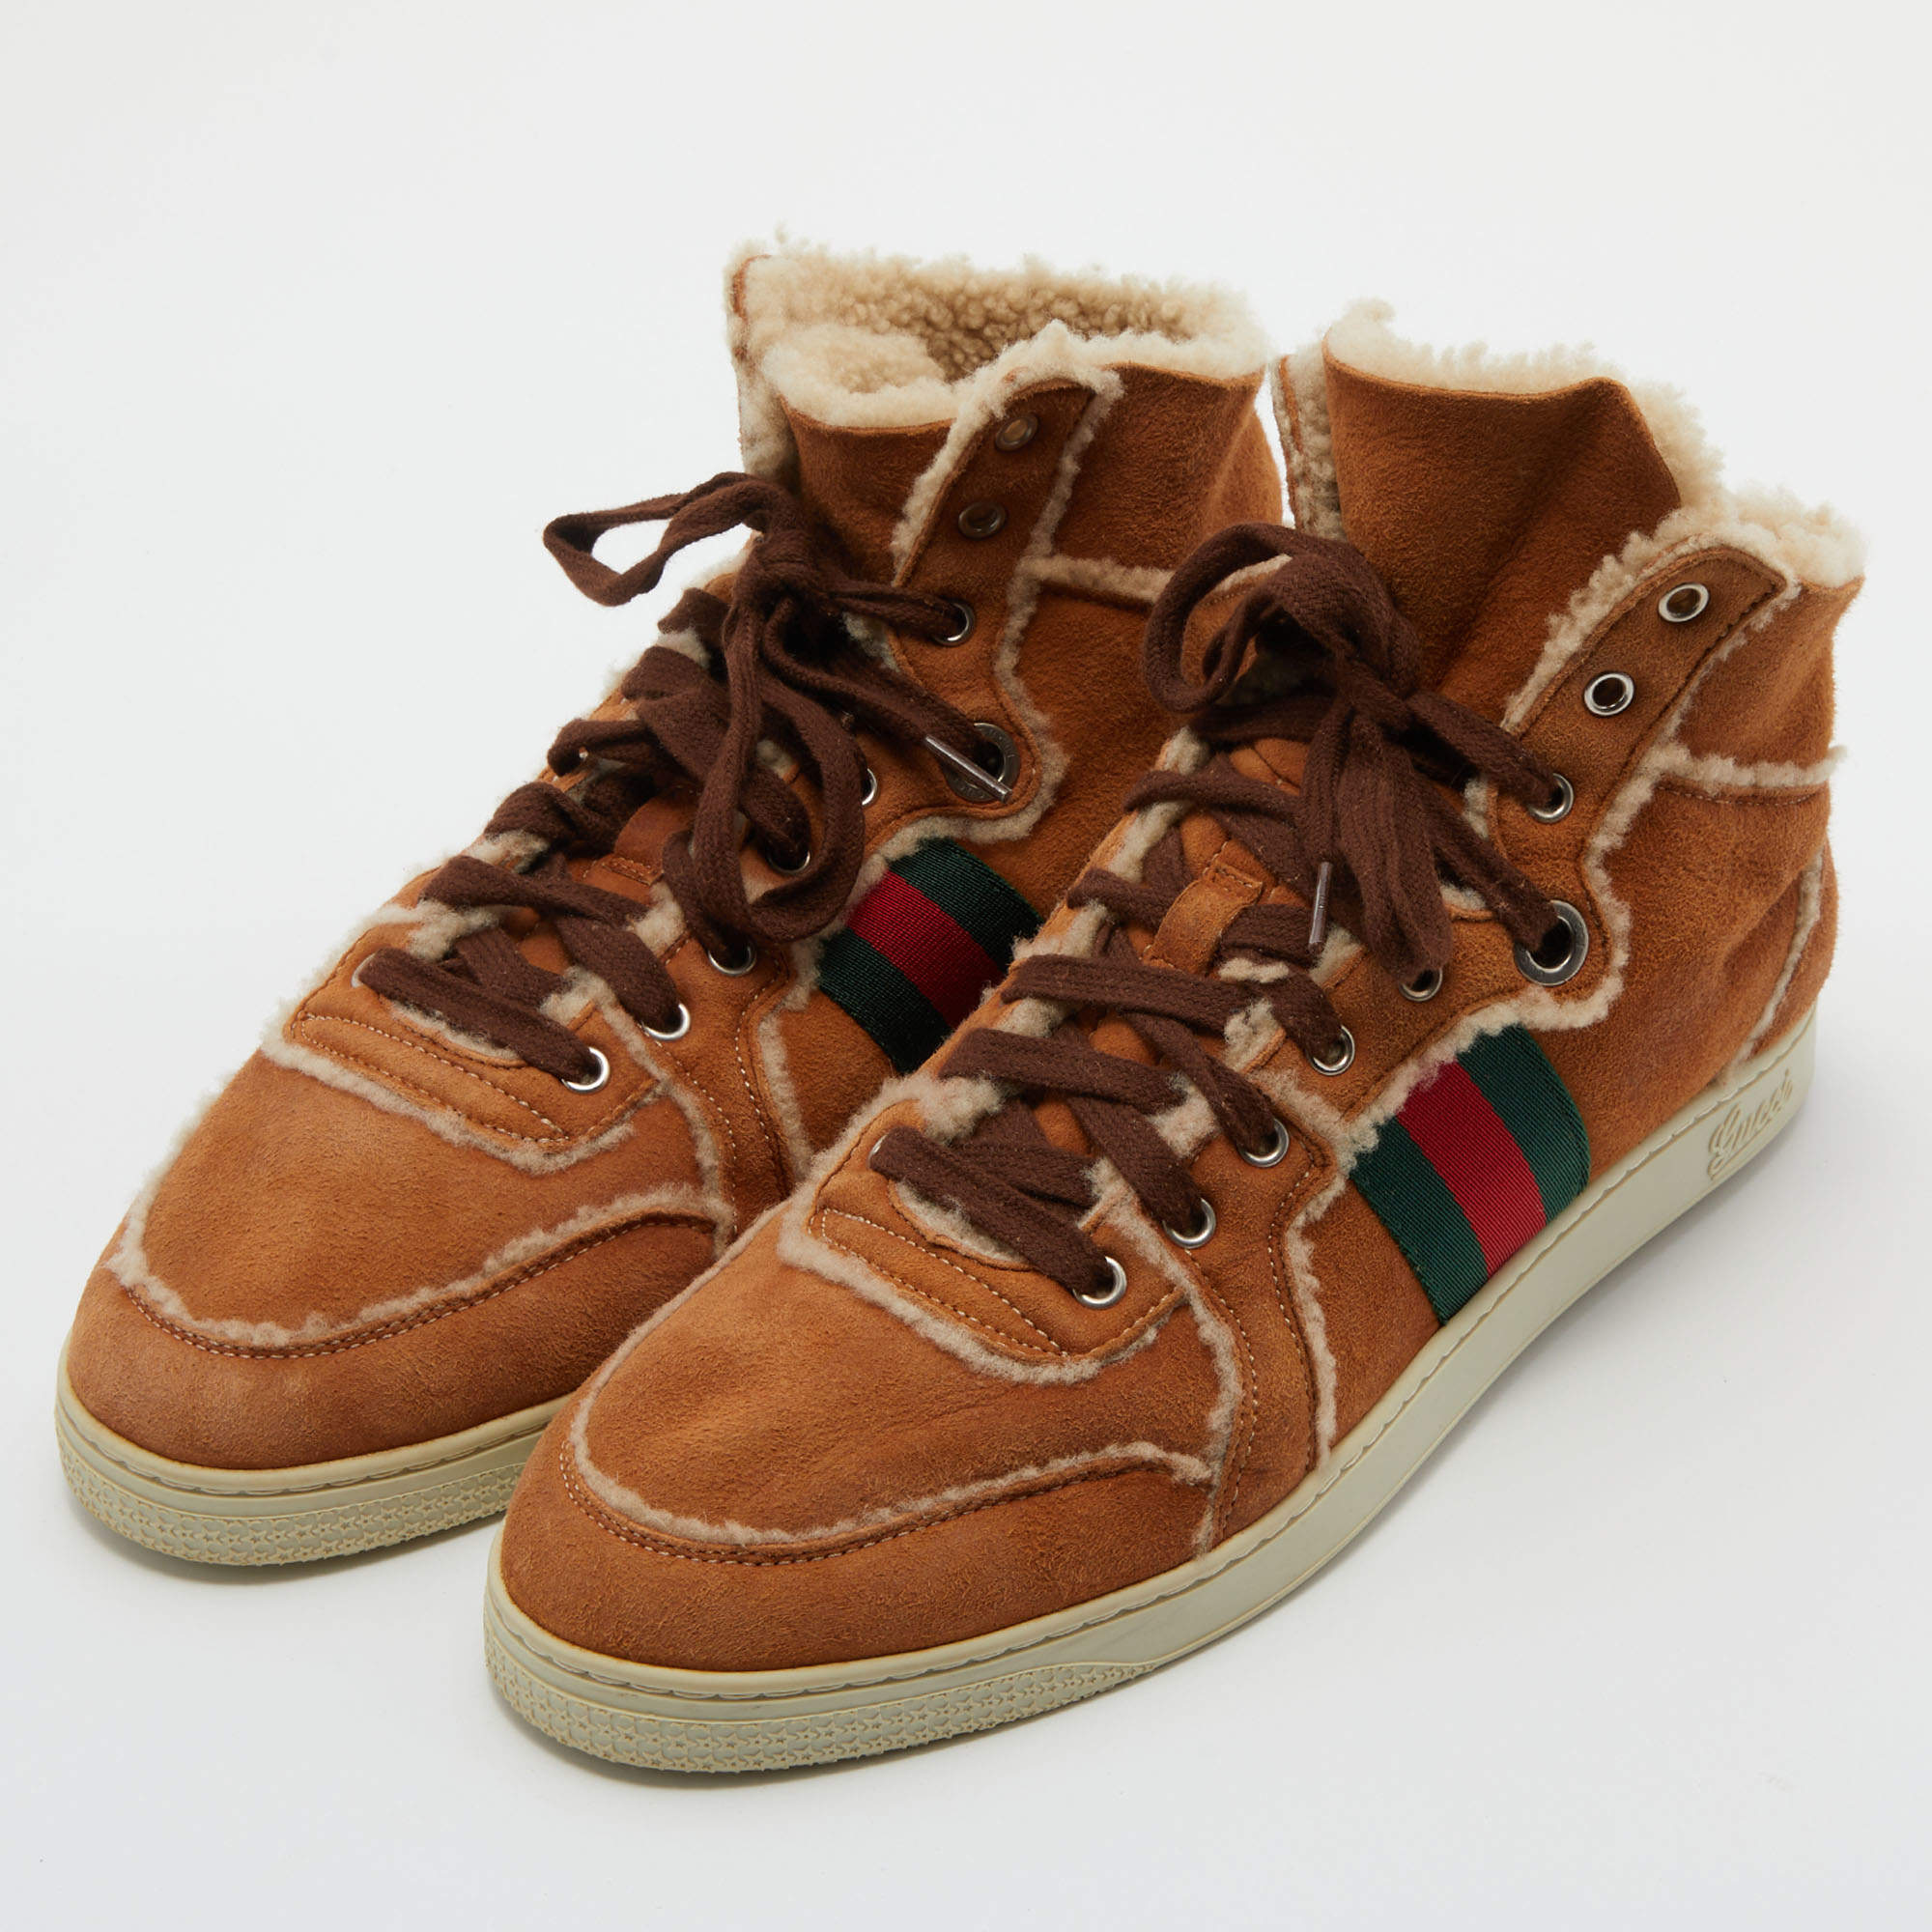 Gucci Suede Shearling Web Boots Brown